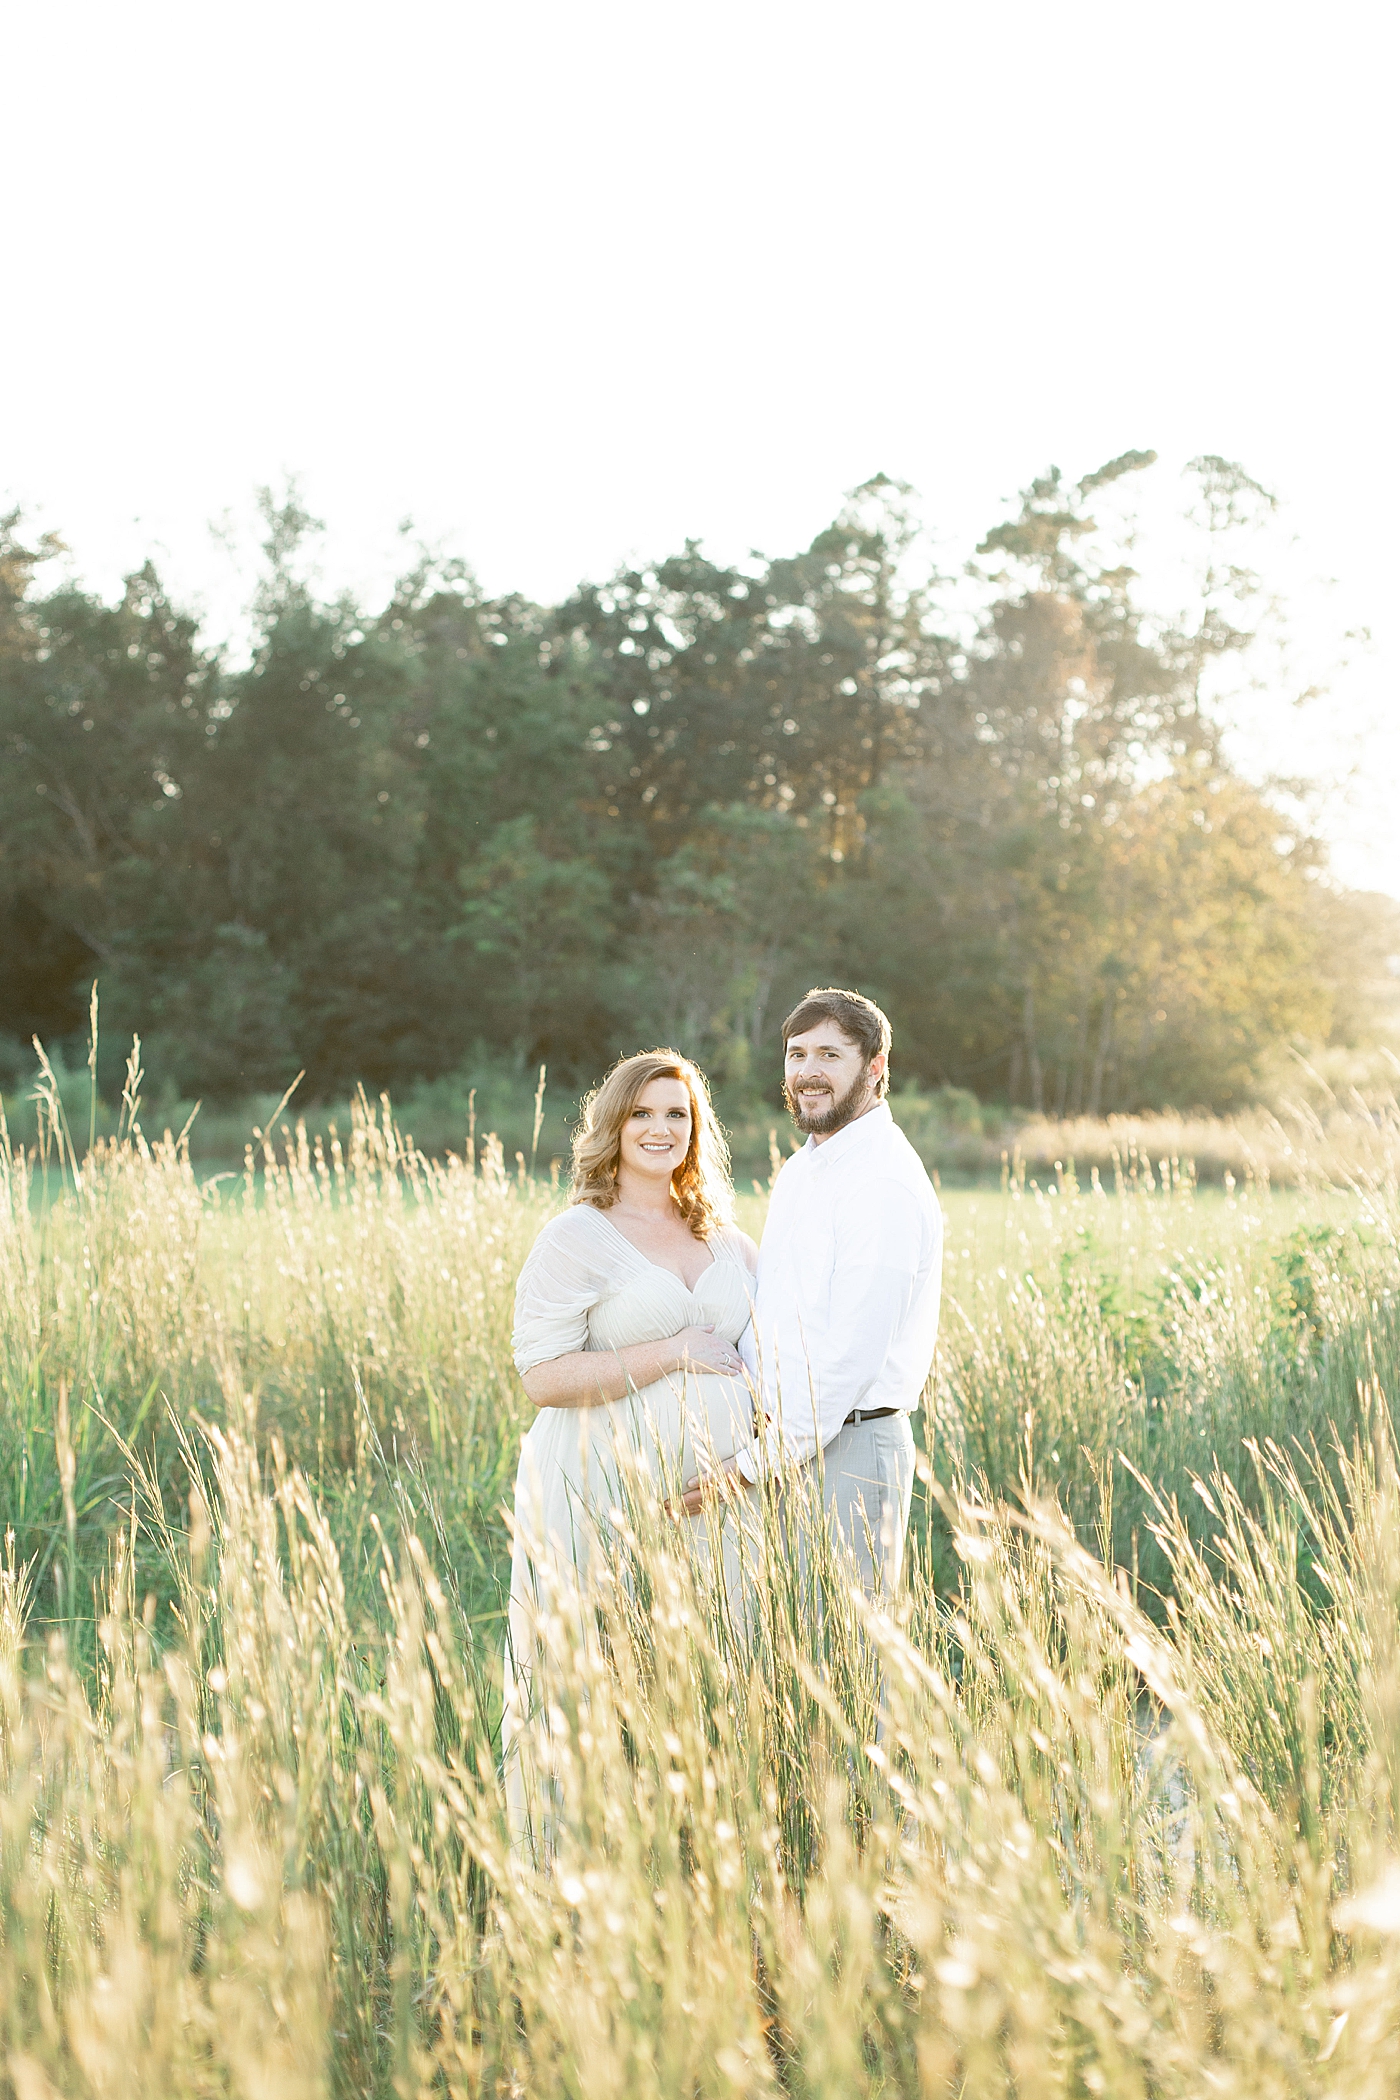 Mother and father to be in a field | Photo by Little Sunshine Photography 